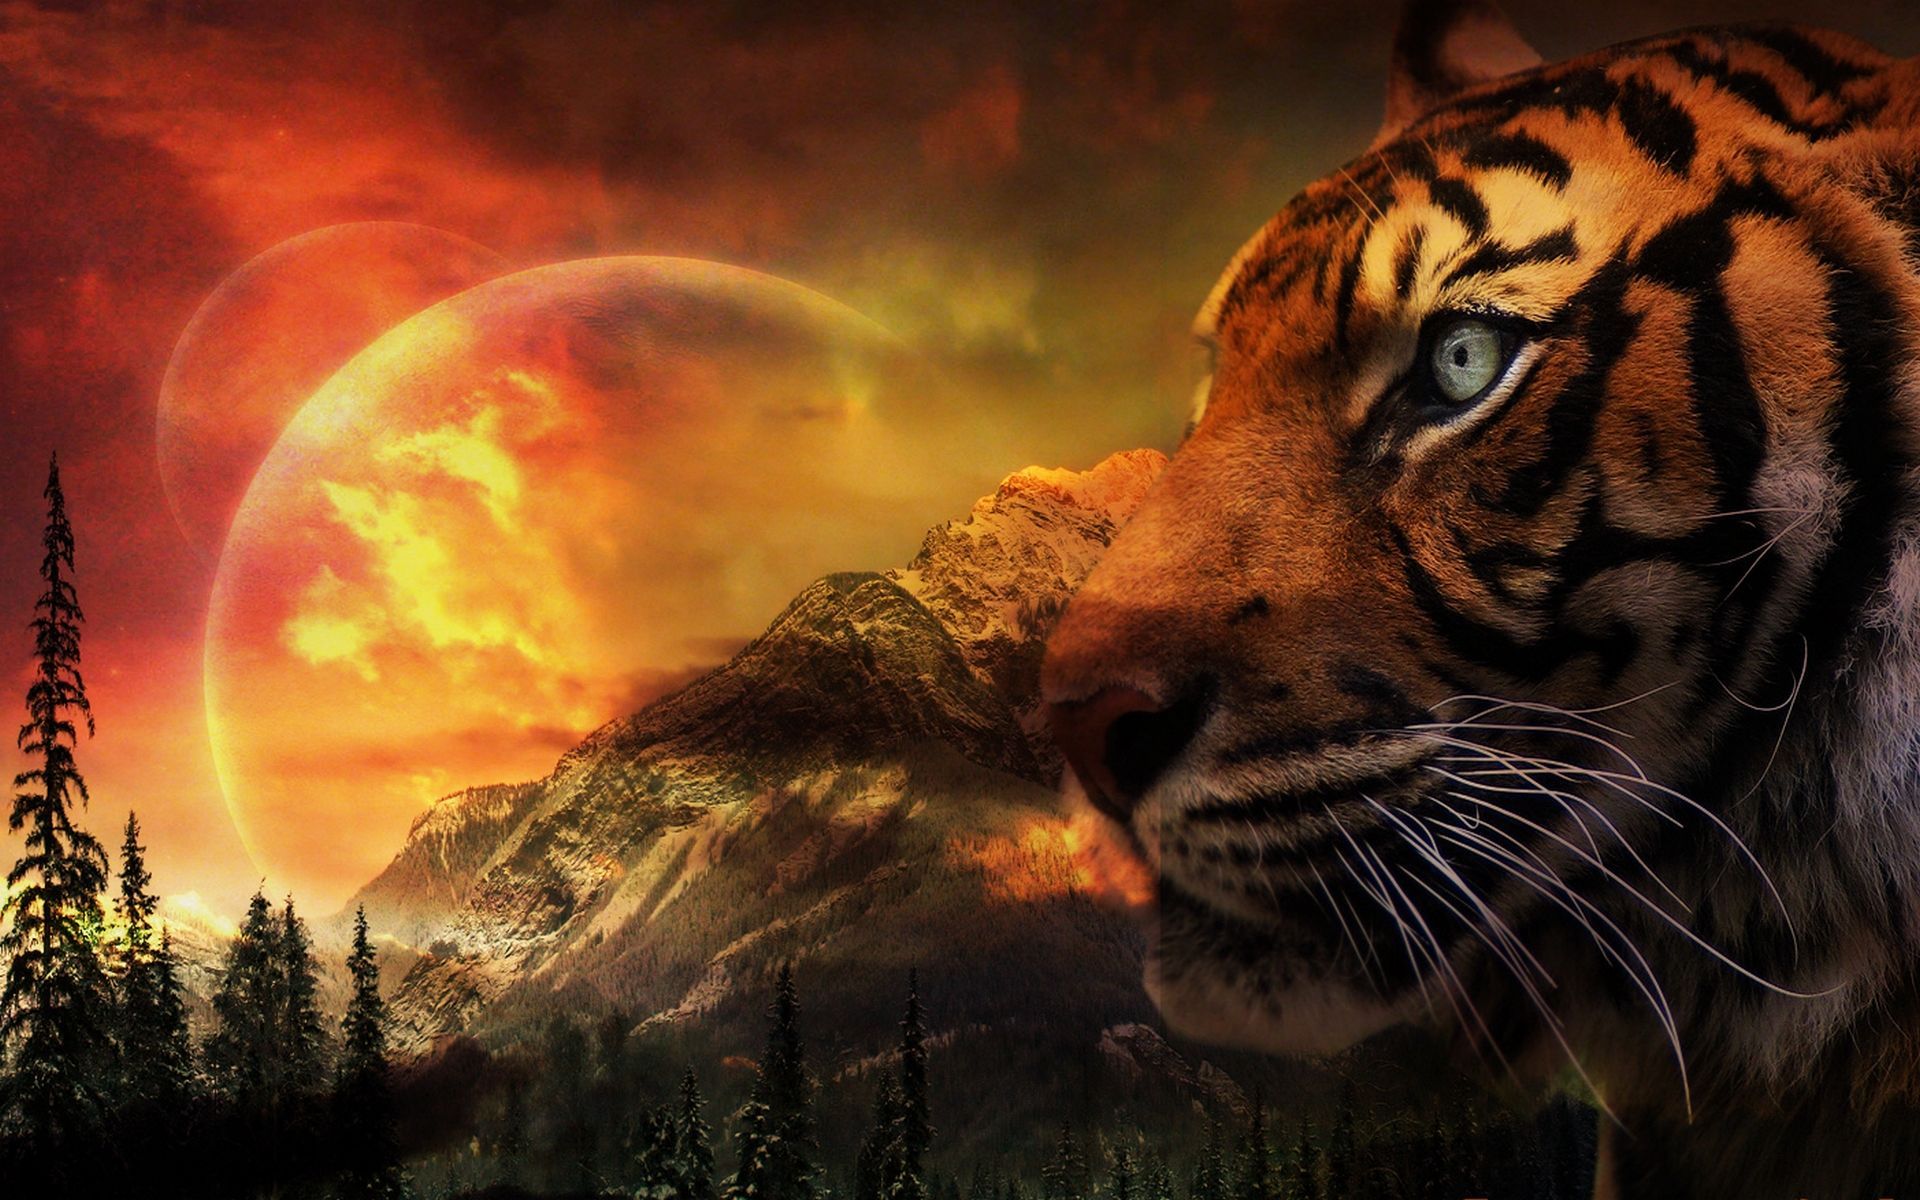 Tiger Art Hd Artist 4k Wallpapers Images Backgrounds Photos And - Riset